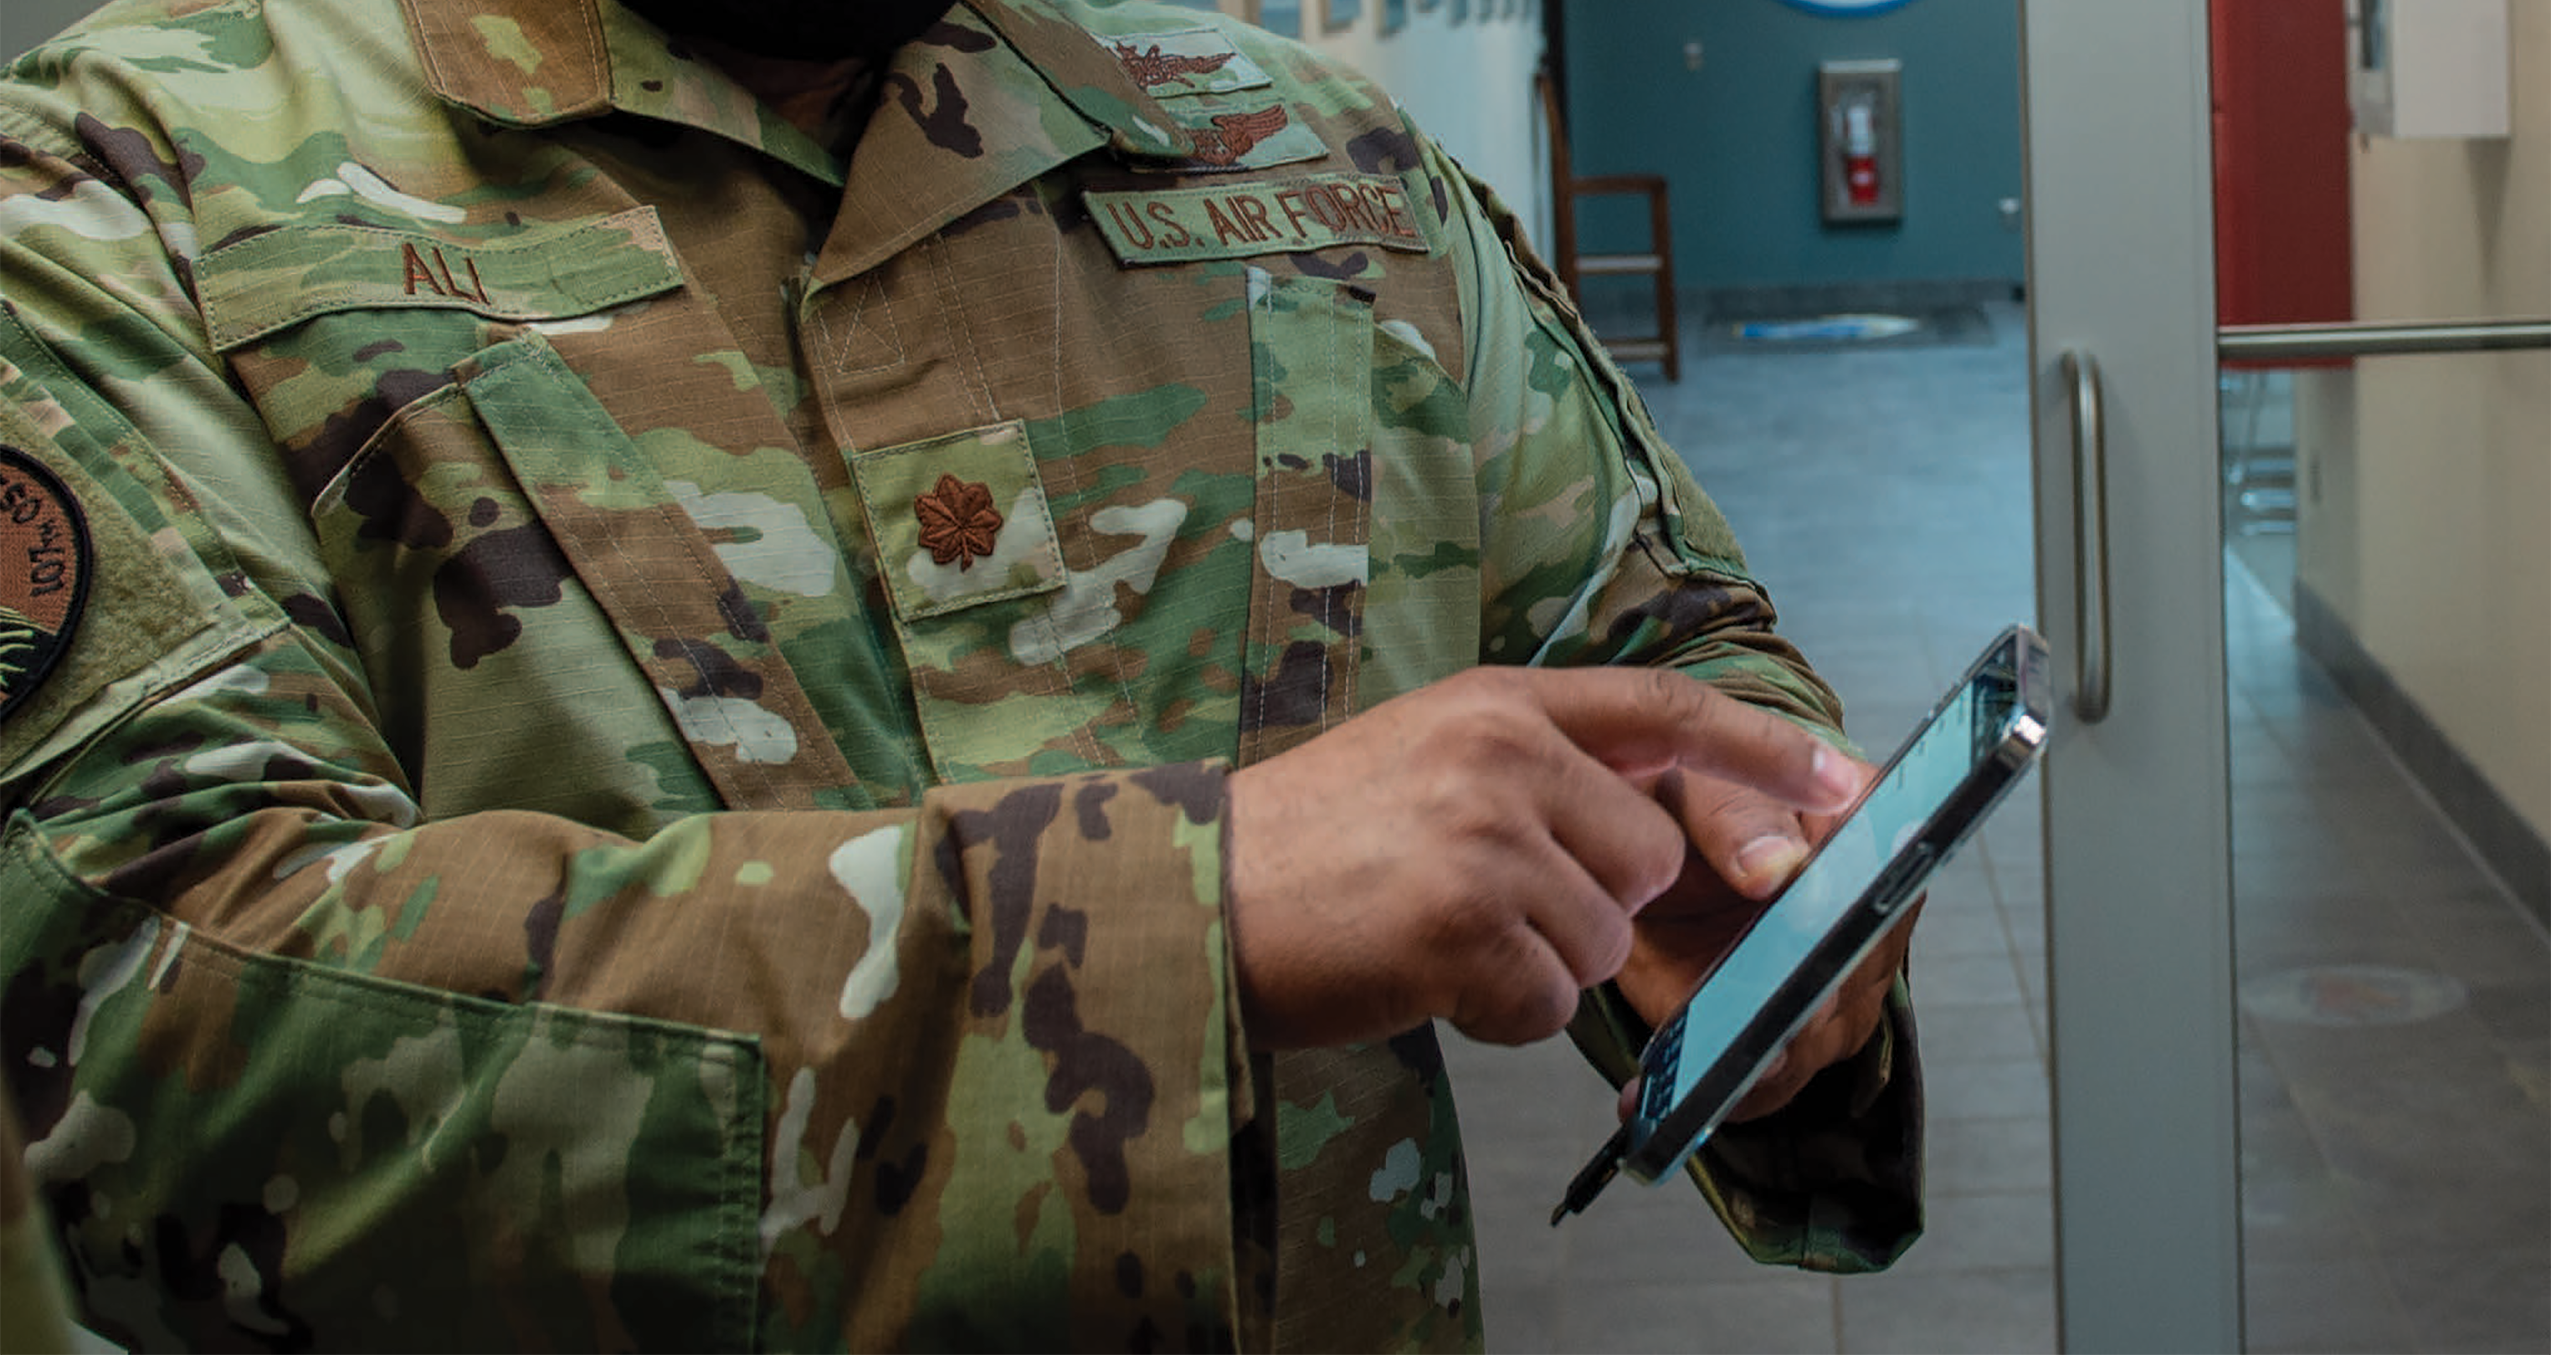 Veteran Talk: Latest Authentication Trends for Service Members in the Field